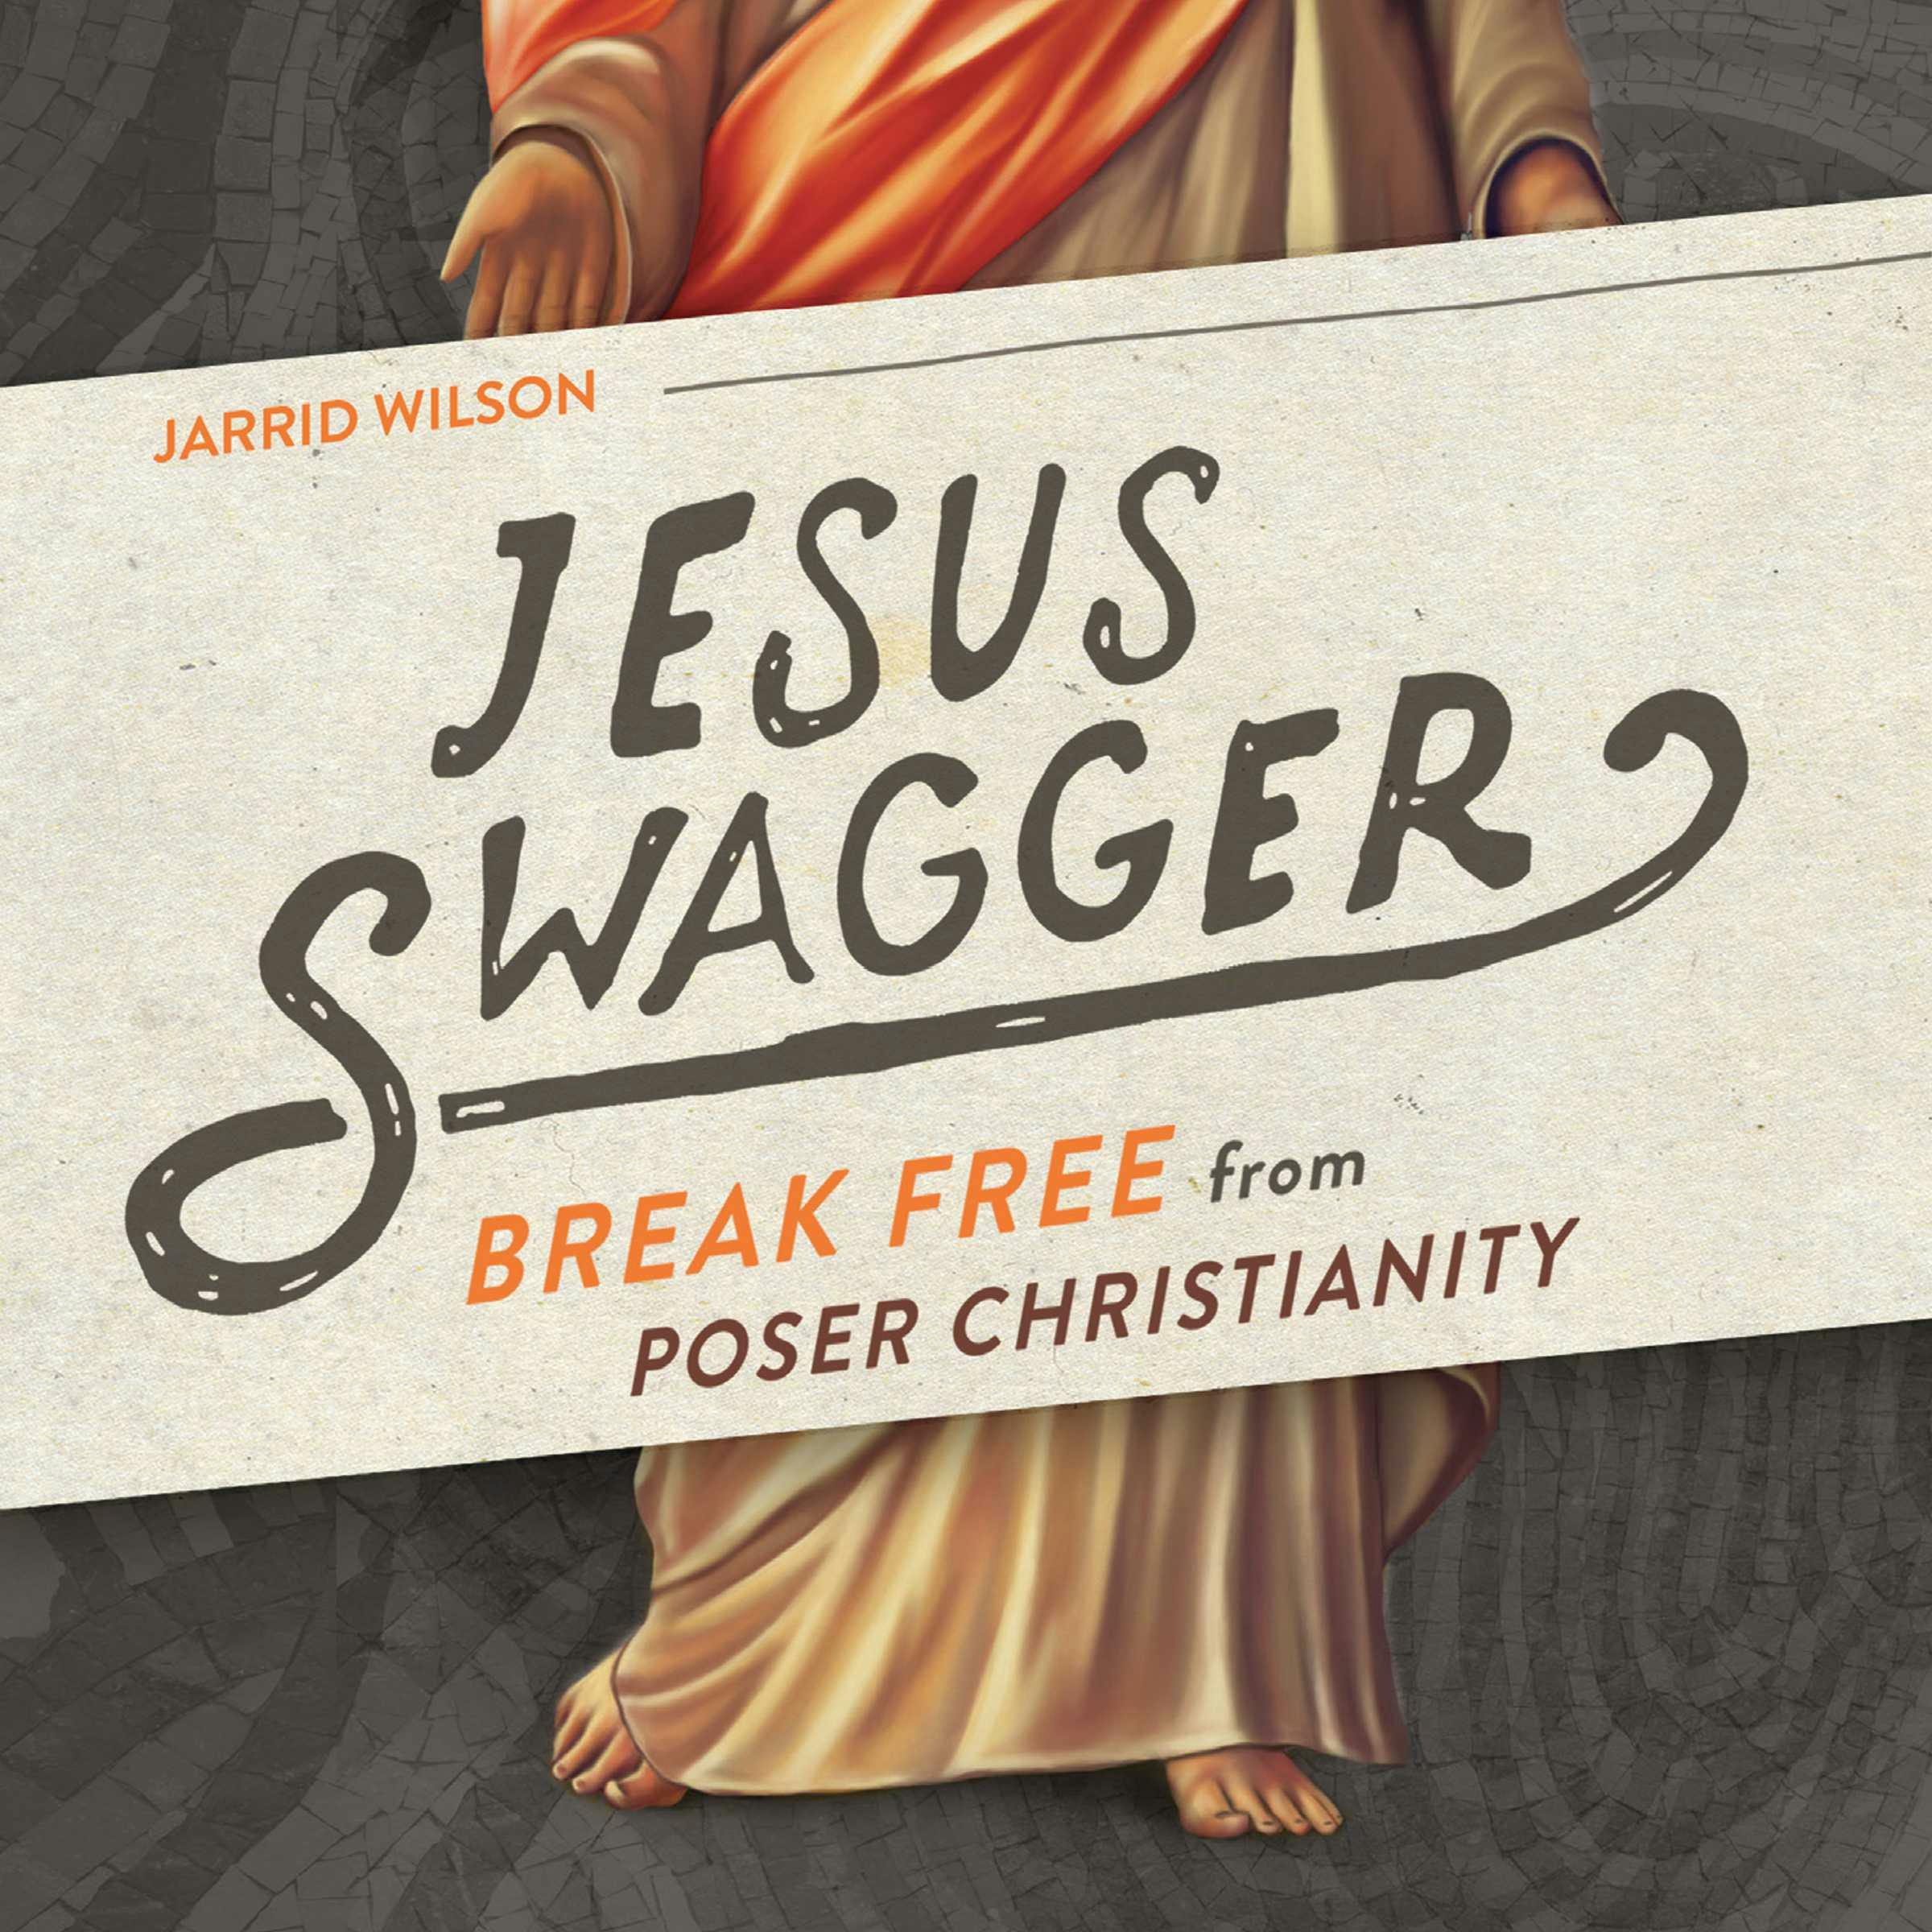 Jesus Swagger: Break Free from Poser Christianity - undefined